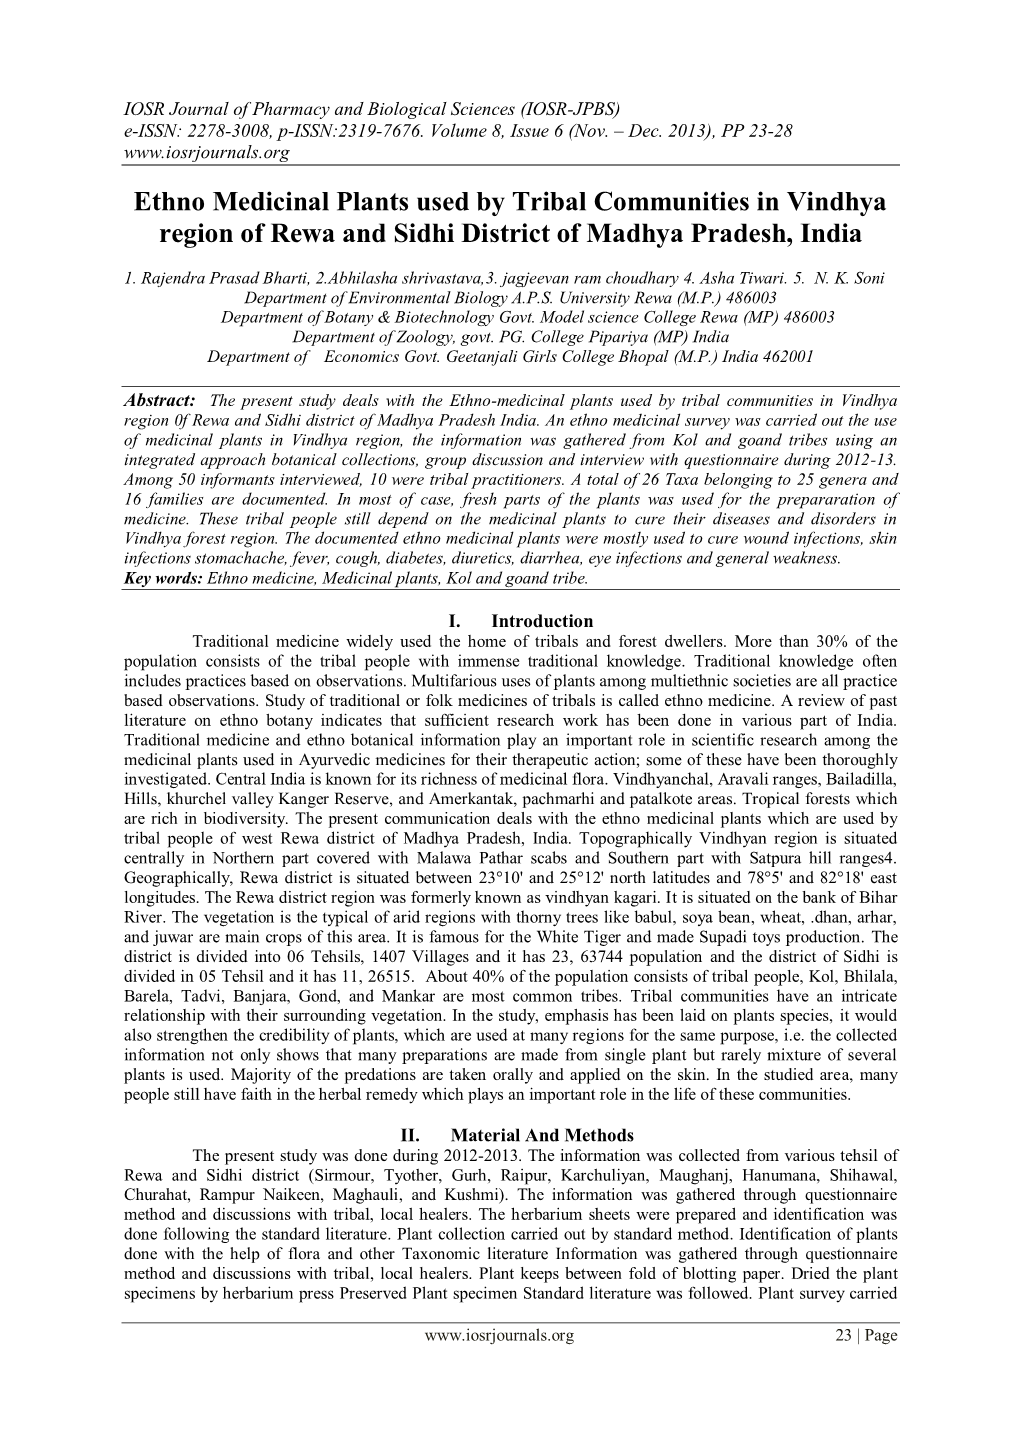 Ethno Medicinal Plants Used by Tribal Communities in Vindhya Region of Rewa and Sidhi District of Madhya Pradesh, India